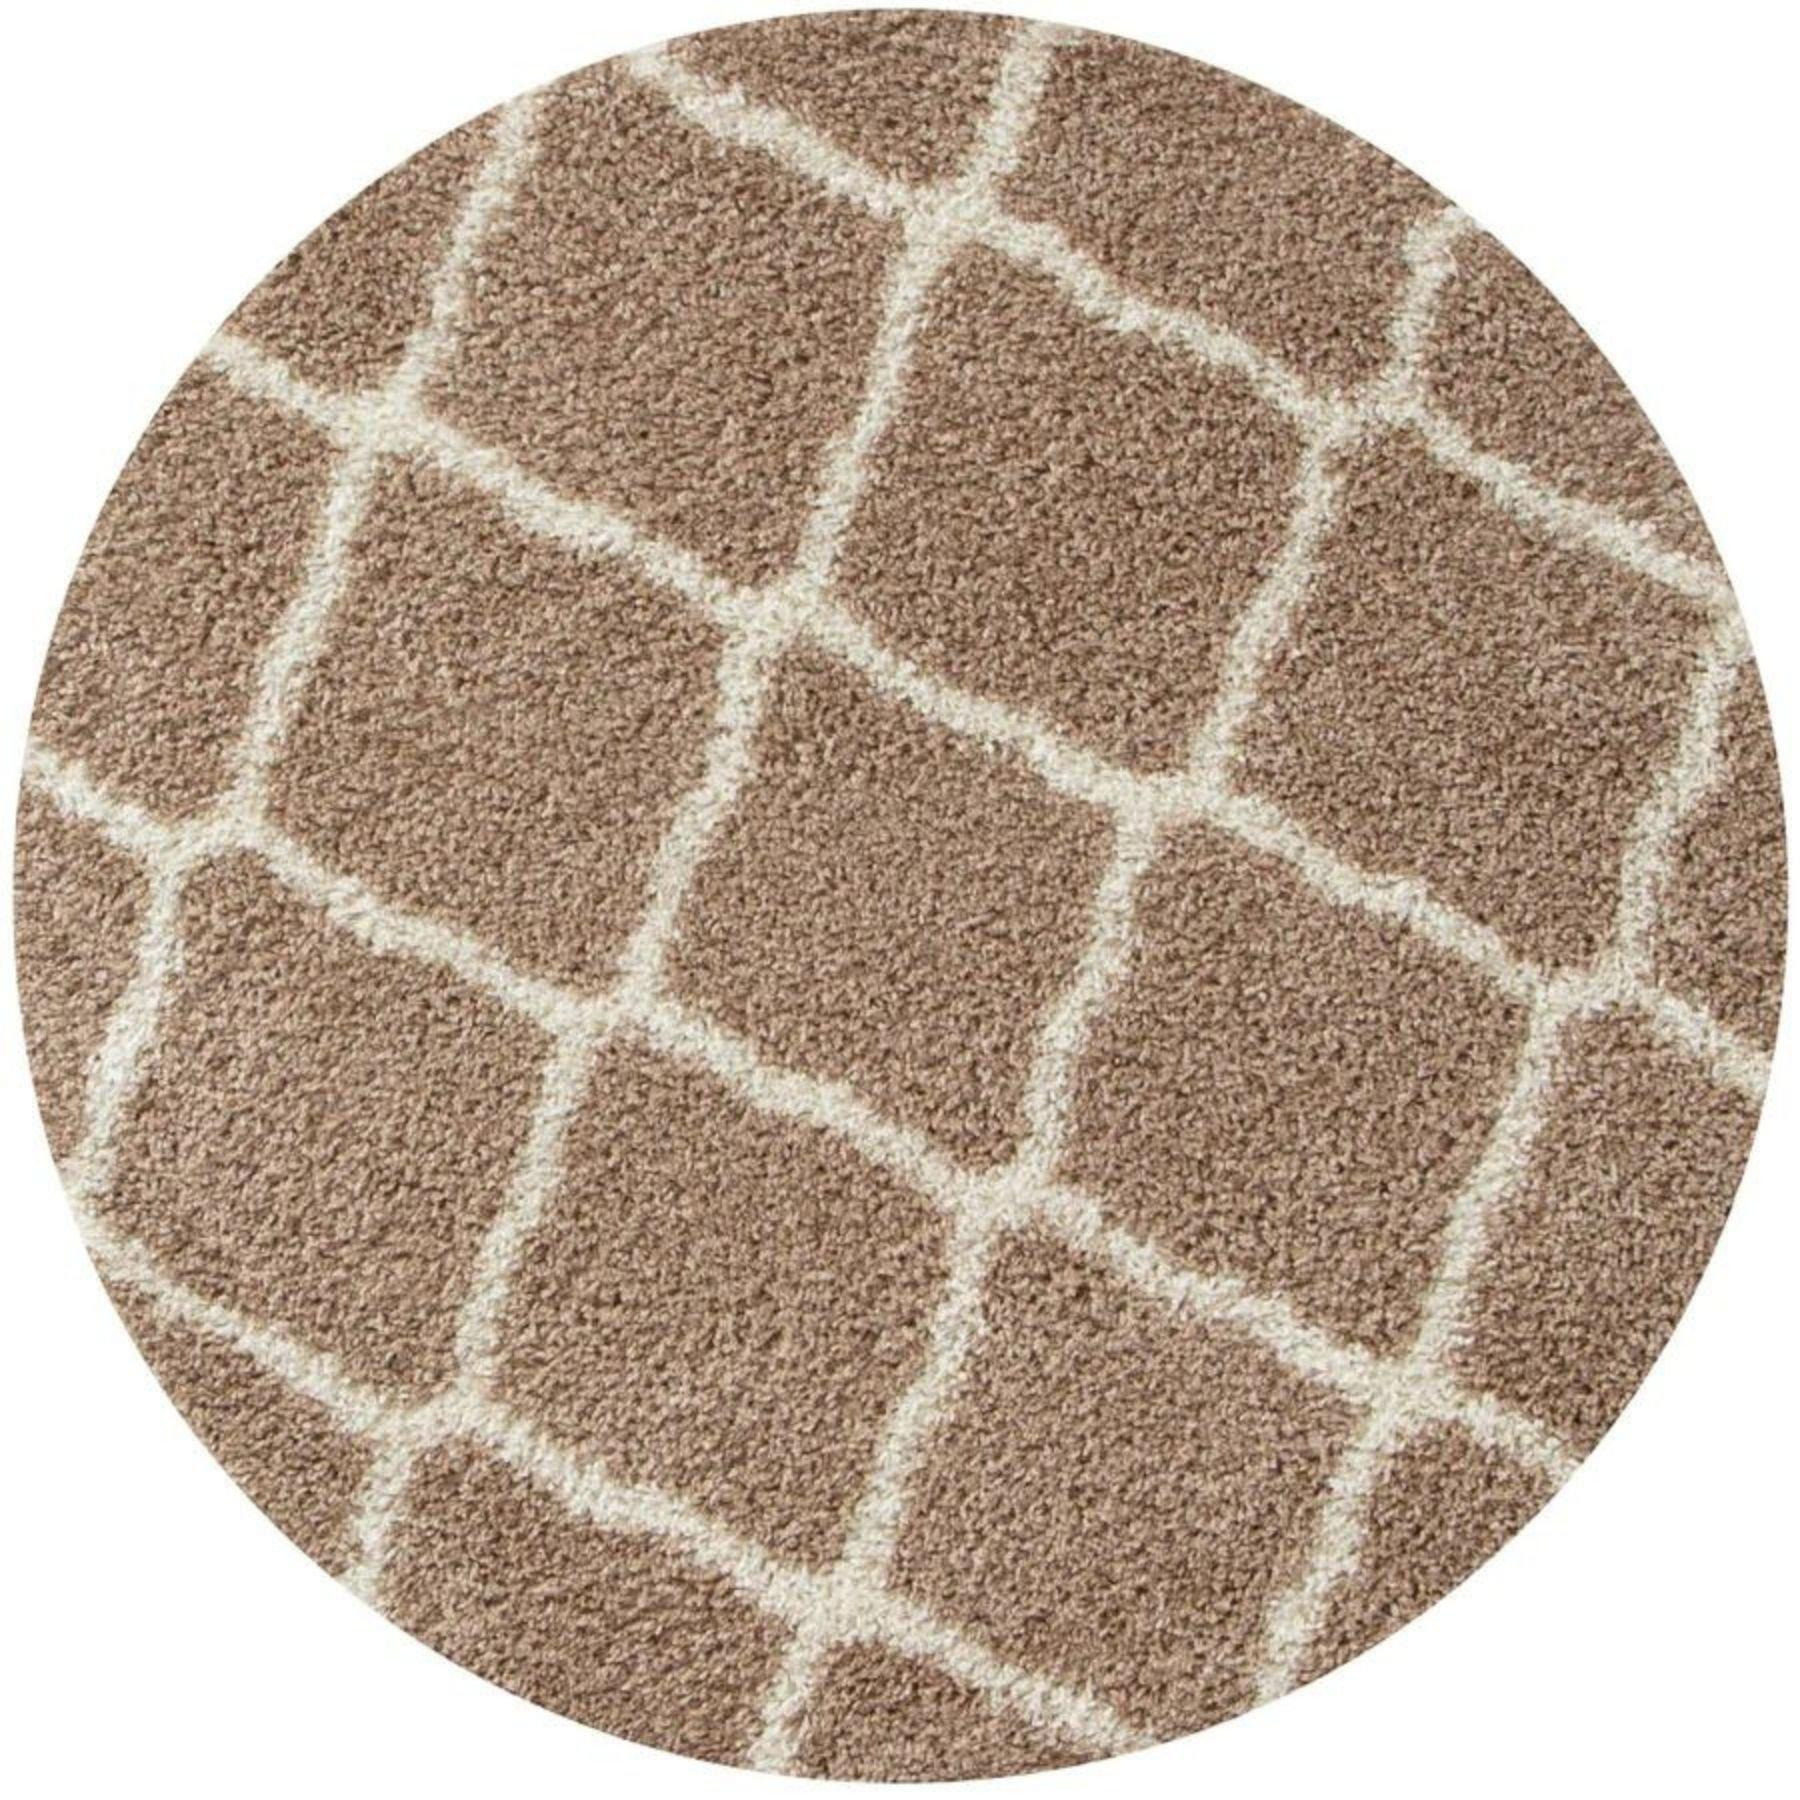 Myshaggy Collection Rugs Moroccan Design in Beige - 385 BI - image 1